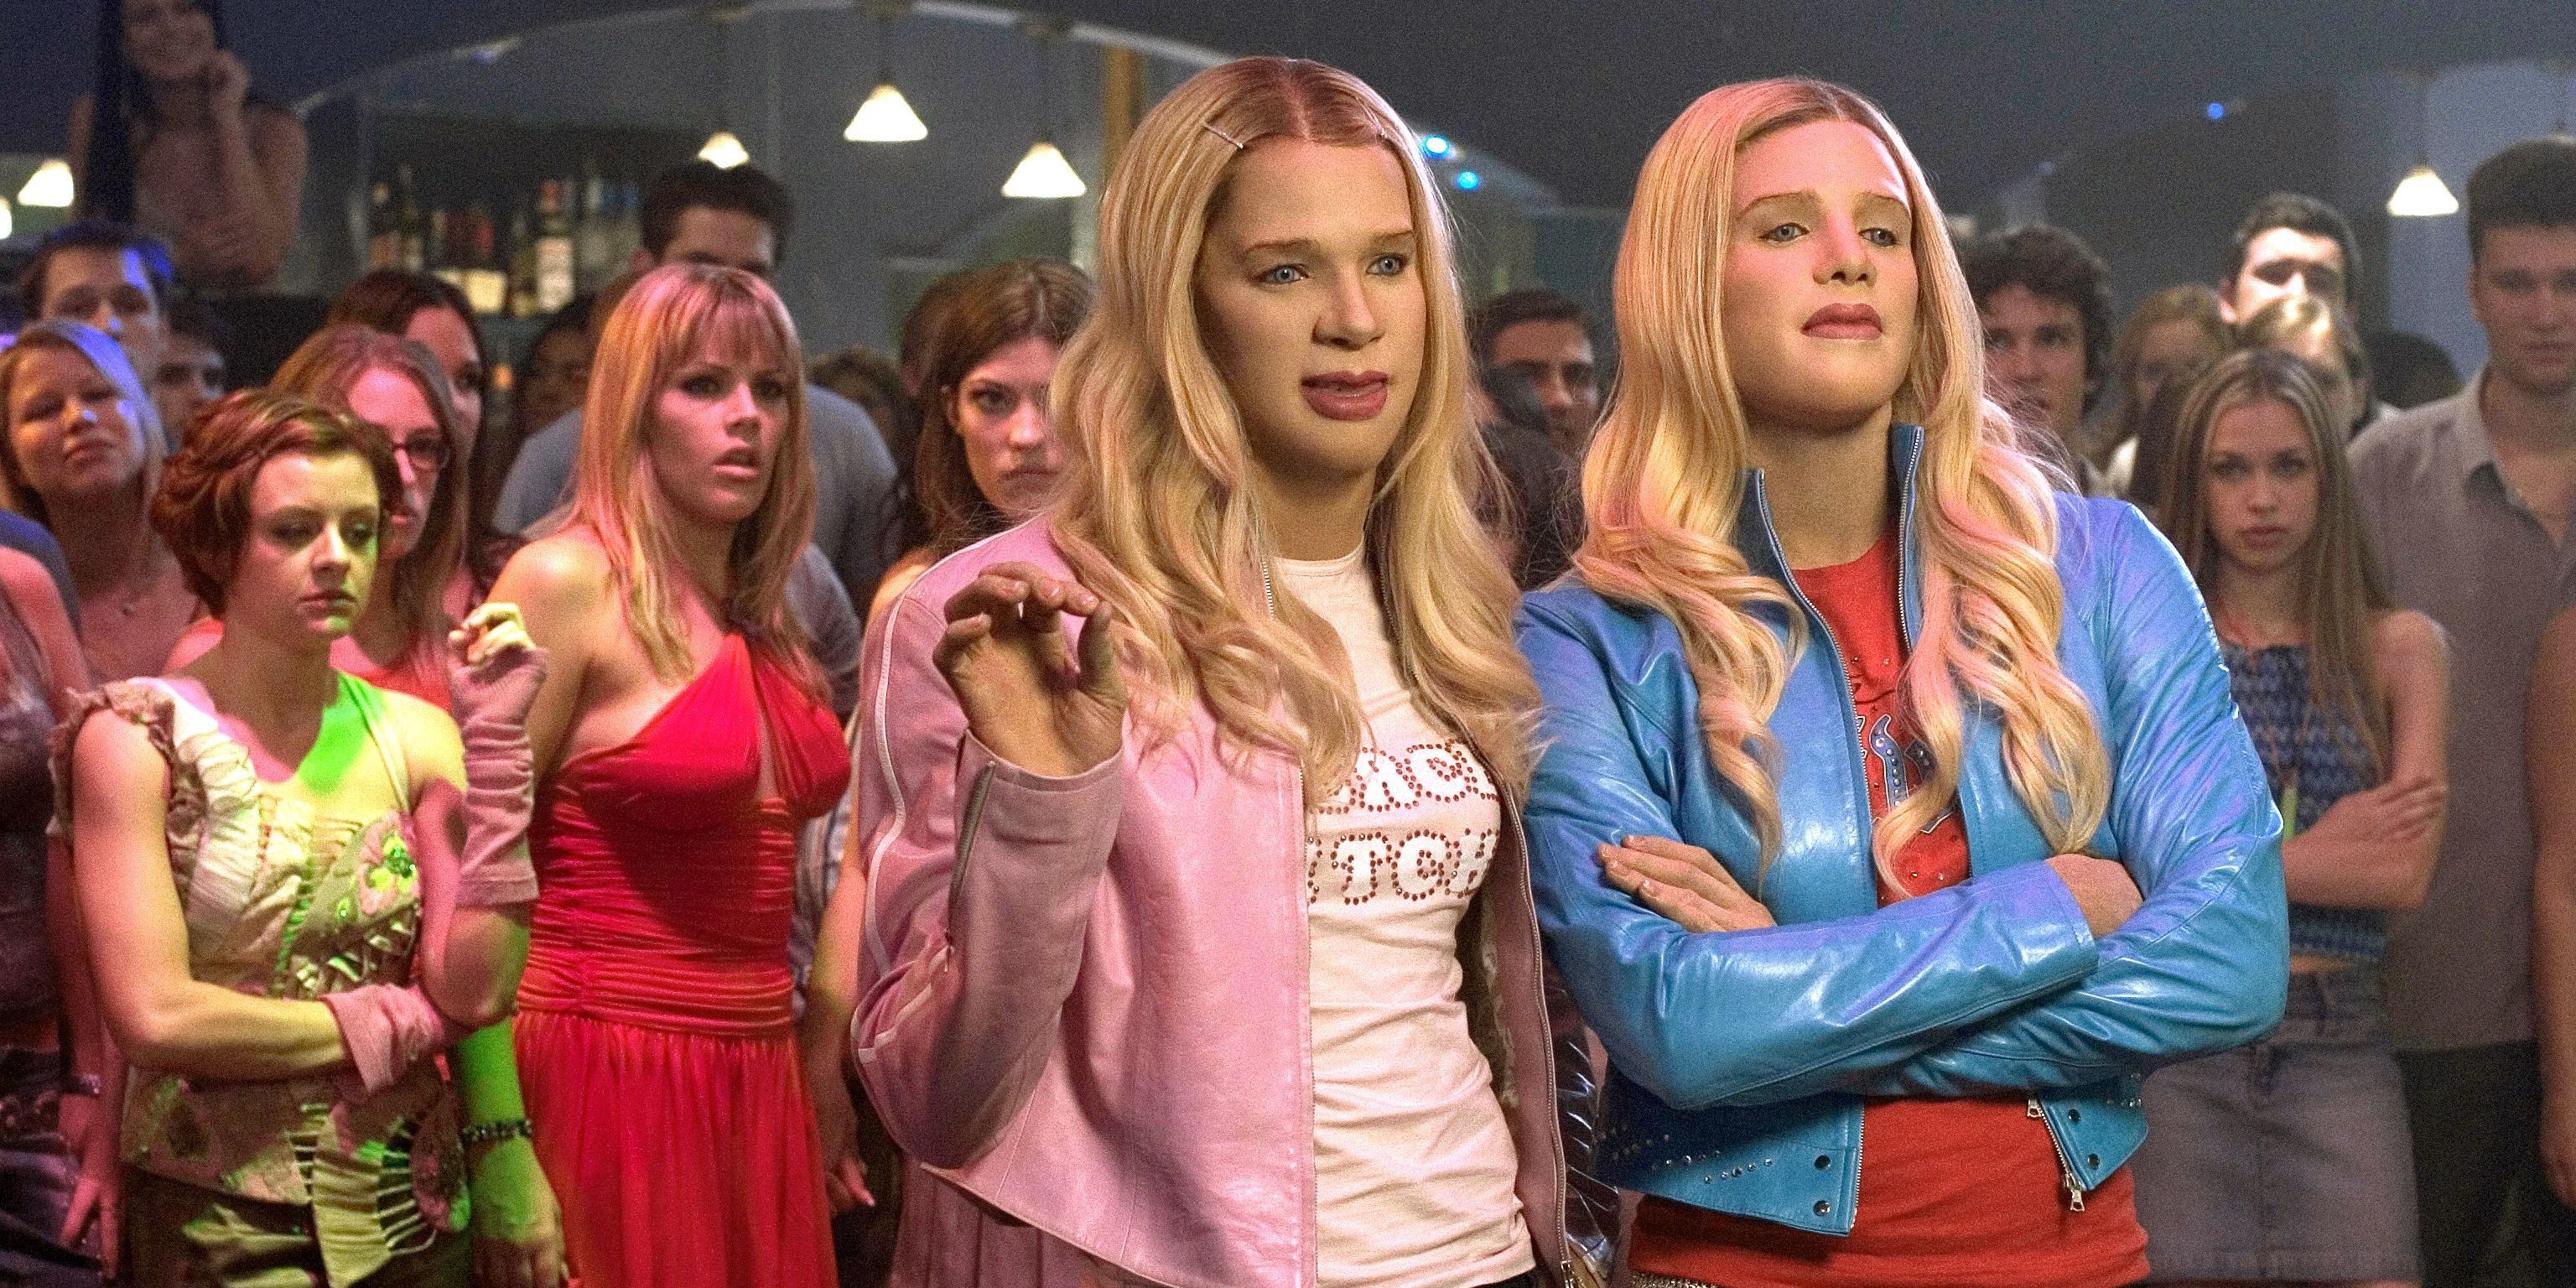 White Chicks 10 Funniest Quotes From The Wayans Brothers Movie Ranked